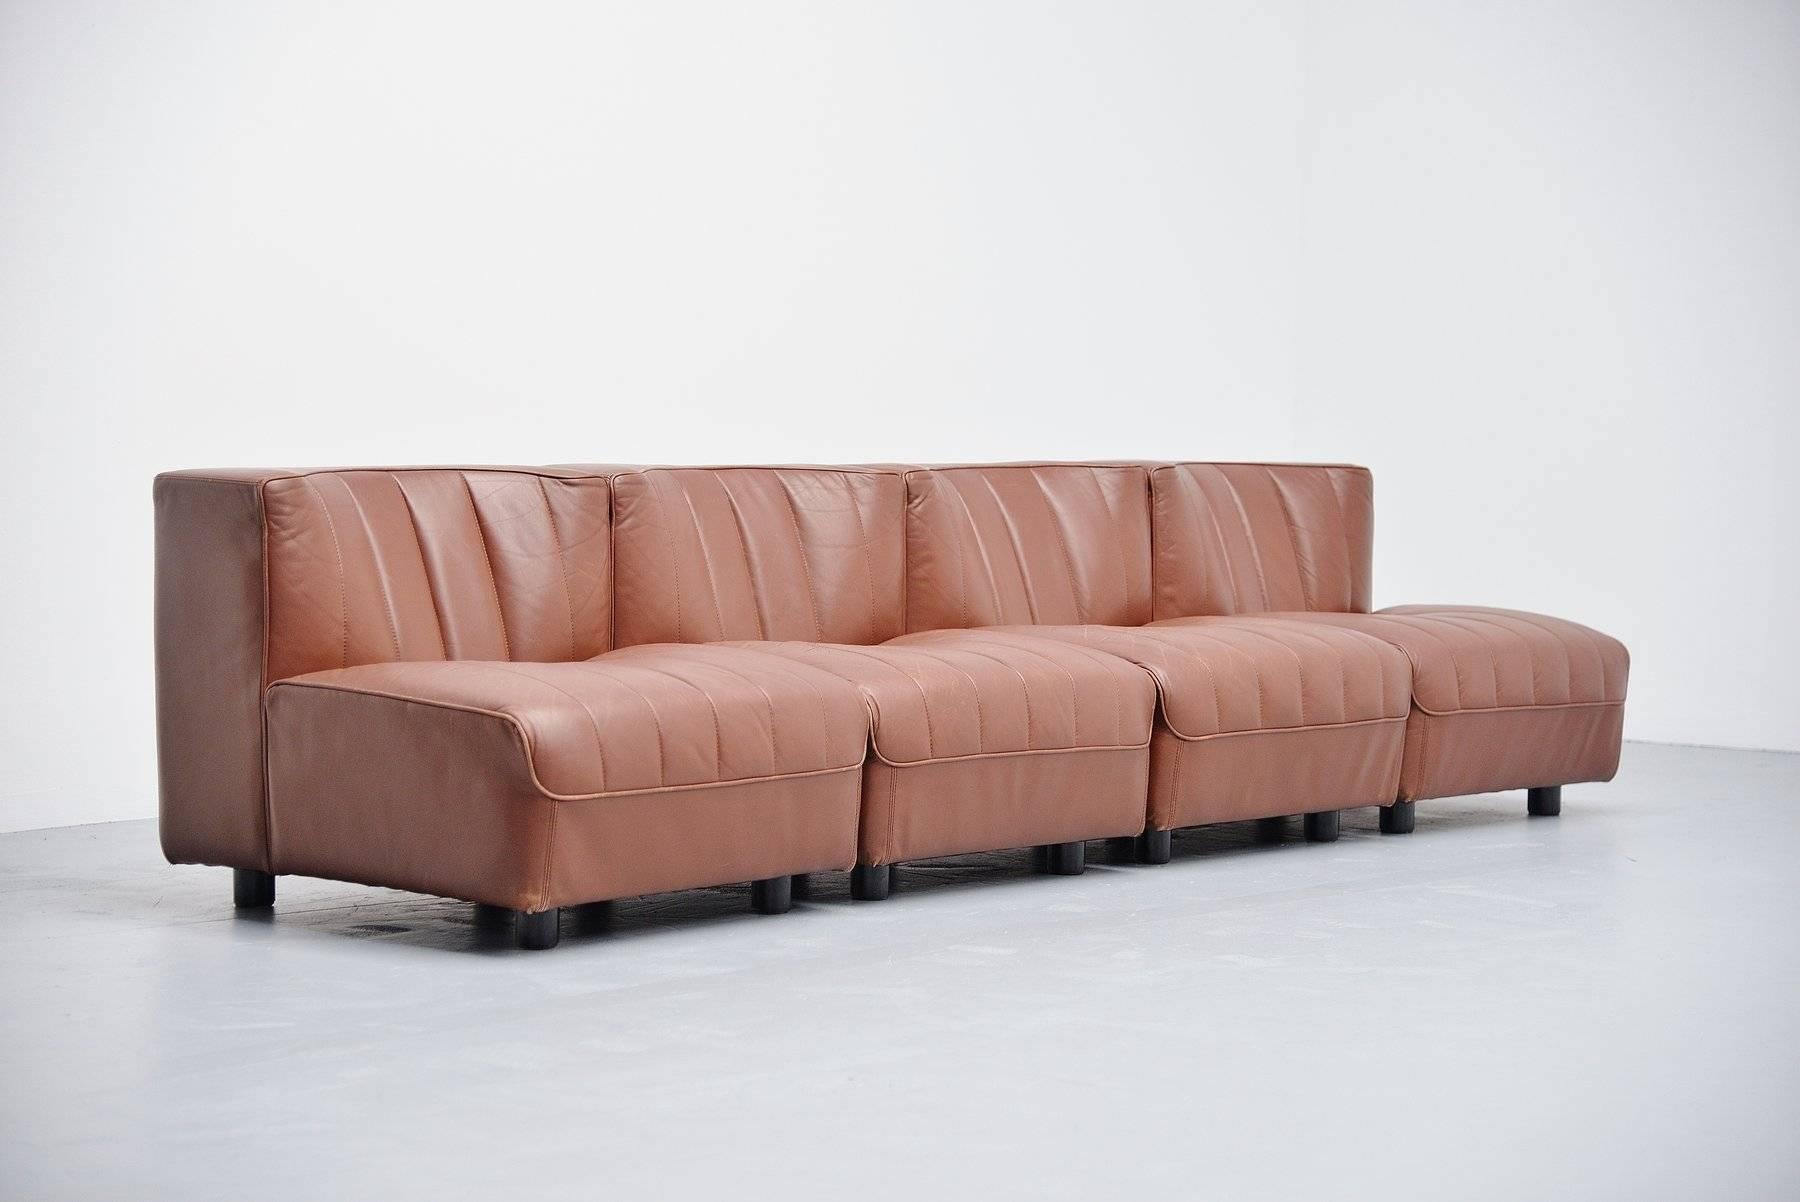 Element sofa from the 9000 series designed by Tito Agnoli for Arflex, Italy, 1969. This sofa exists of four separate elements that can be made one sofa or 2 two-seat sofa's or four single chairs. Multi functional sofa elements. Sofa has a wooden